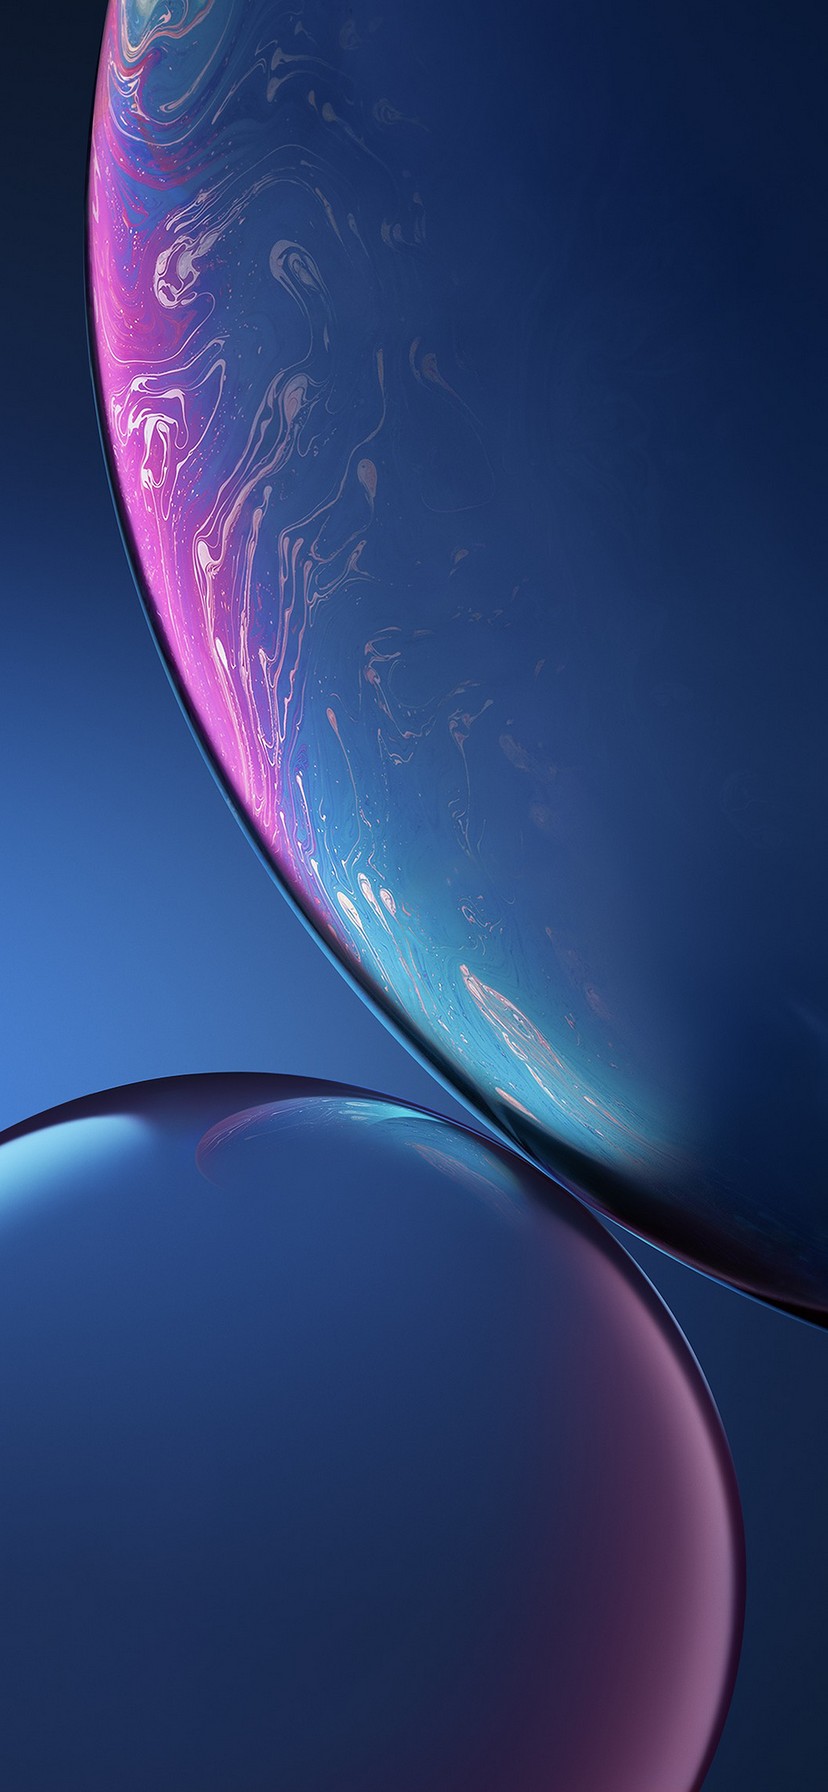 Iphone Xr Screensaver With High-resolution Pixel - Обои Iphone Xs Max - HD Wallpaper 